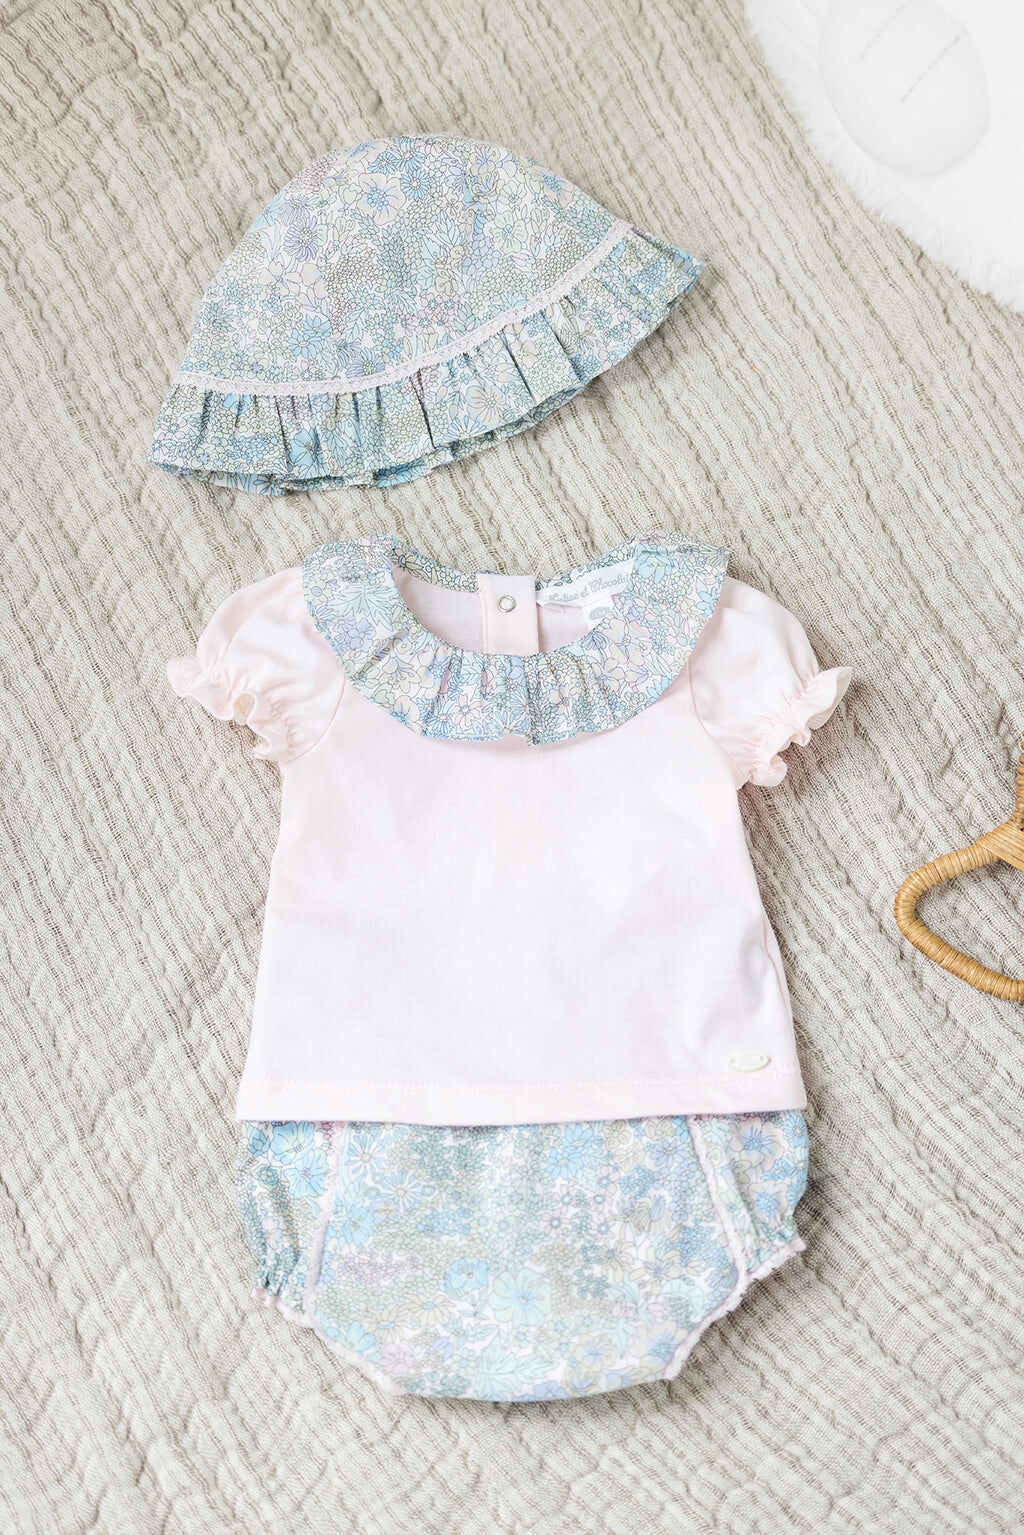 Outfit short - Pale pink Liberty